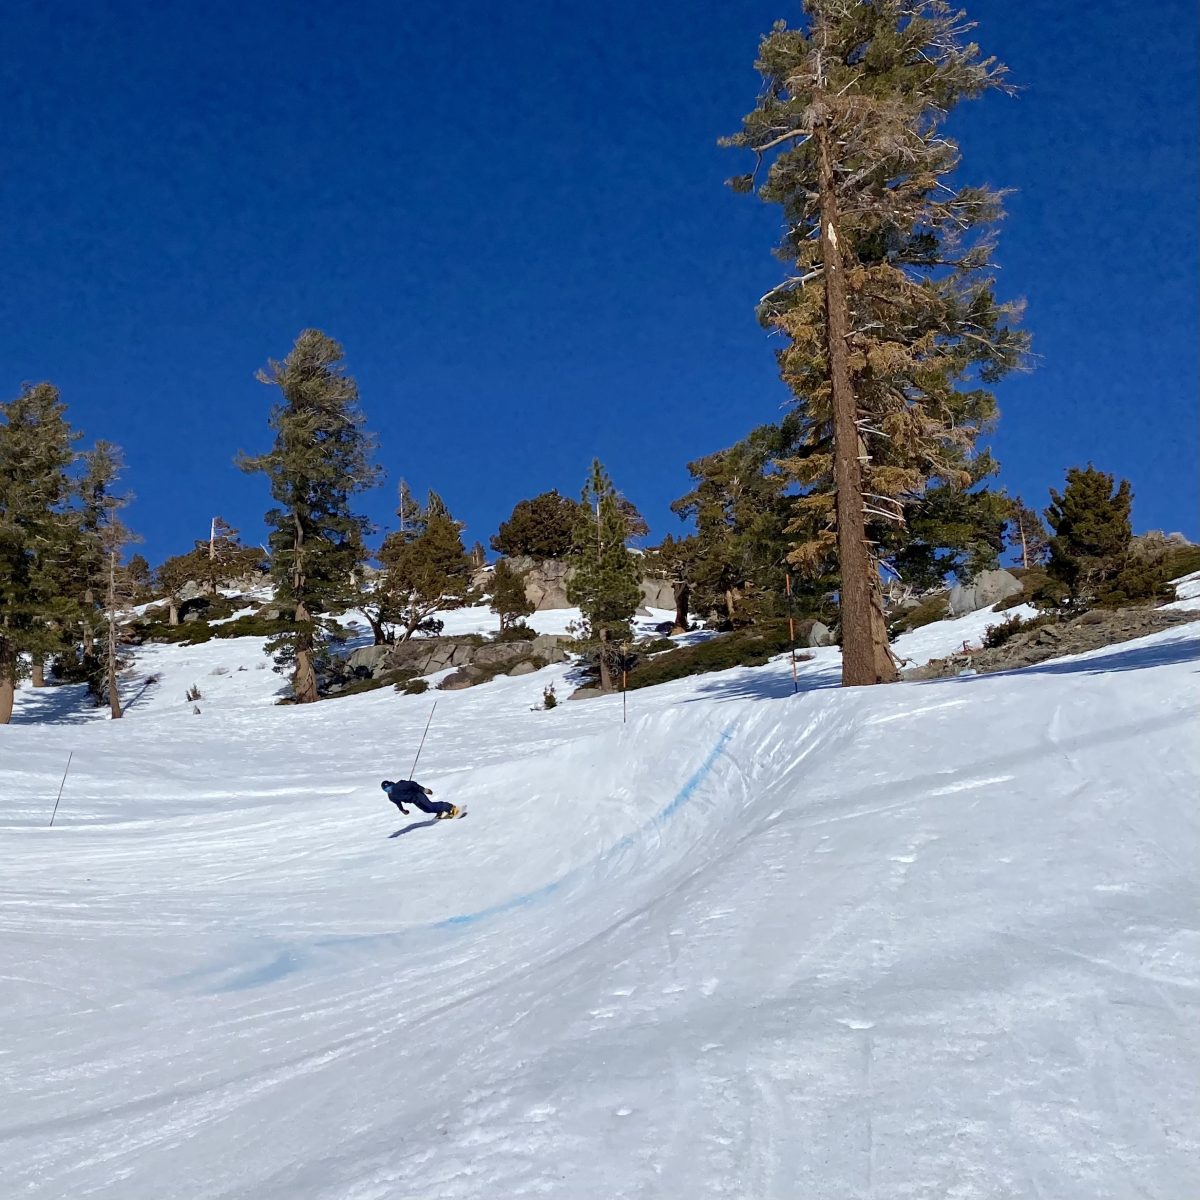 Snowboarder rounding a turn on Palisades Tahoe's boardercross course